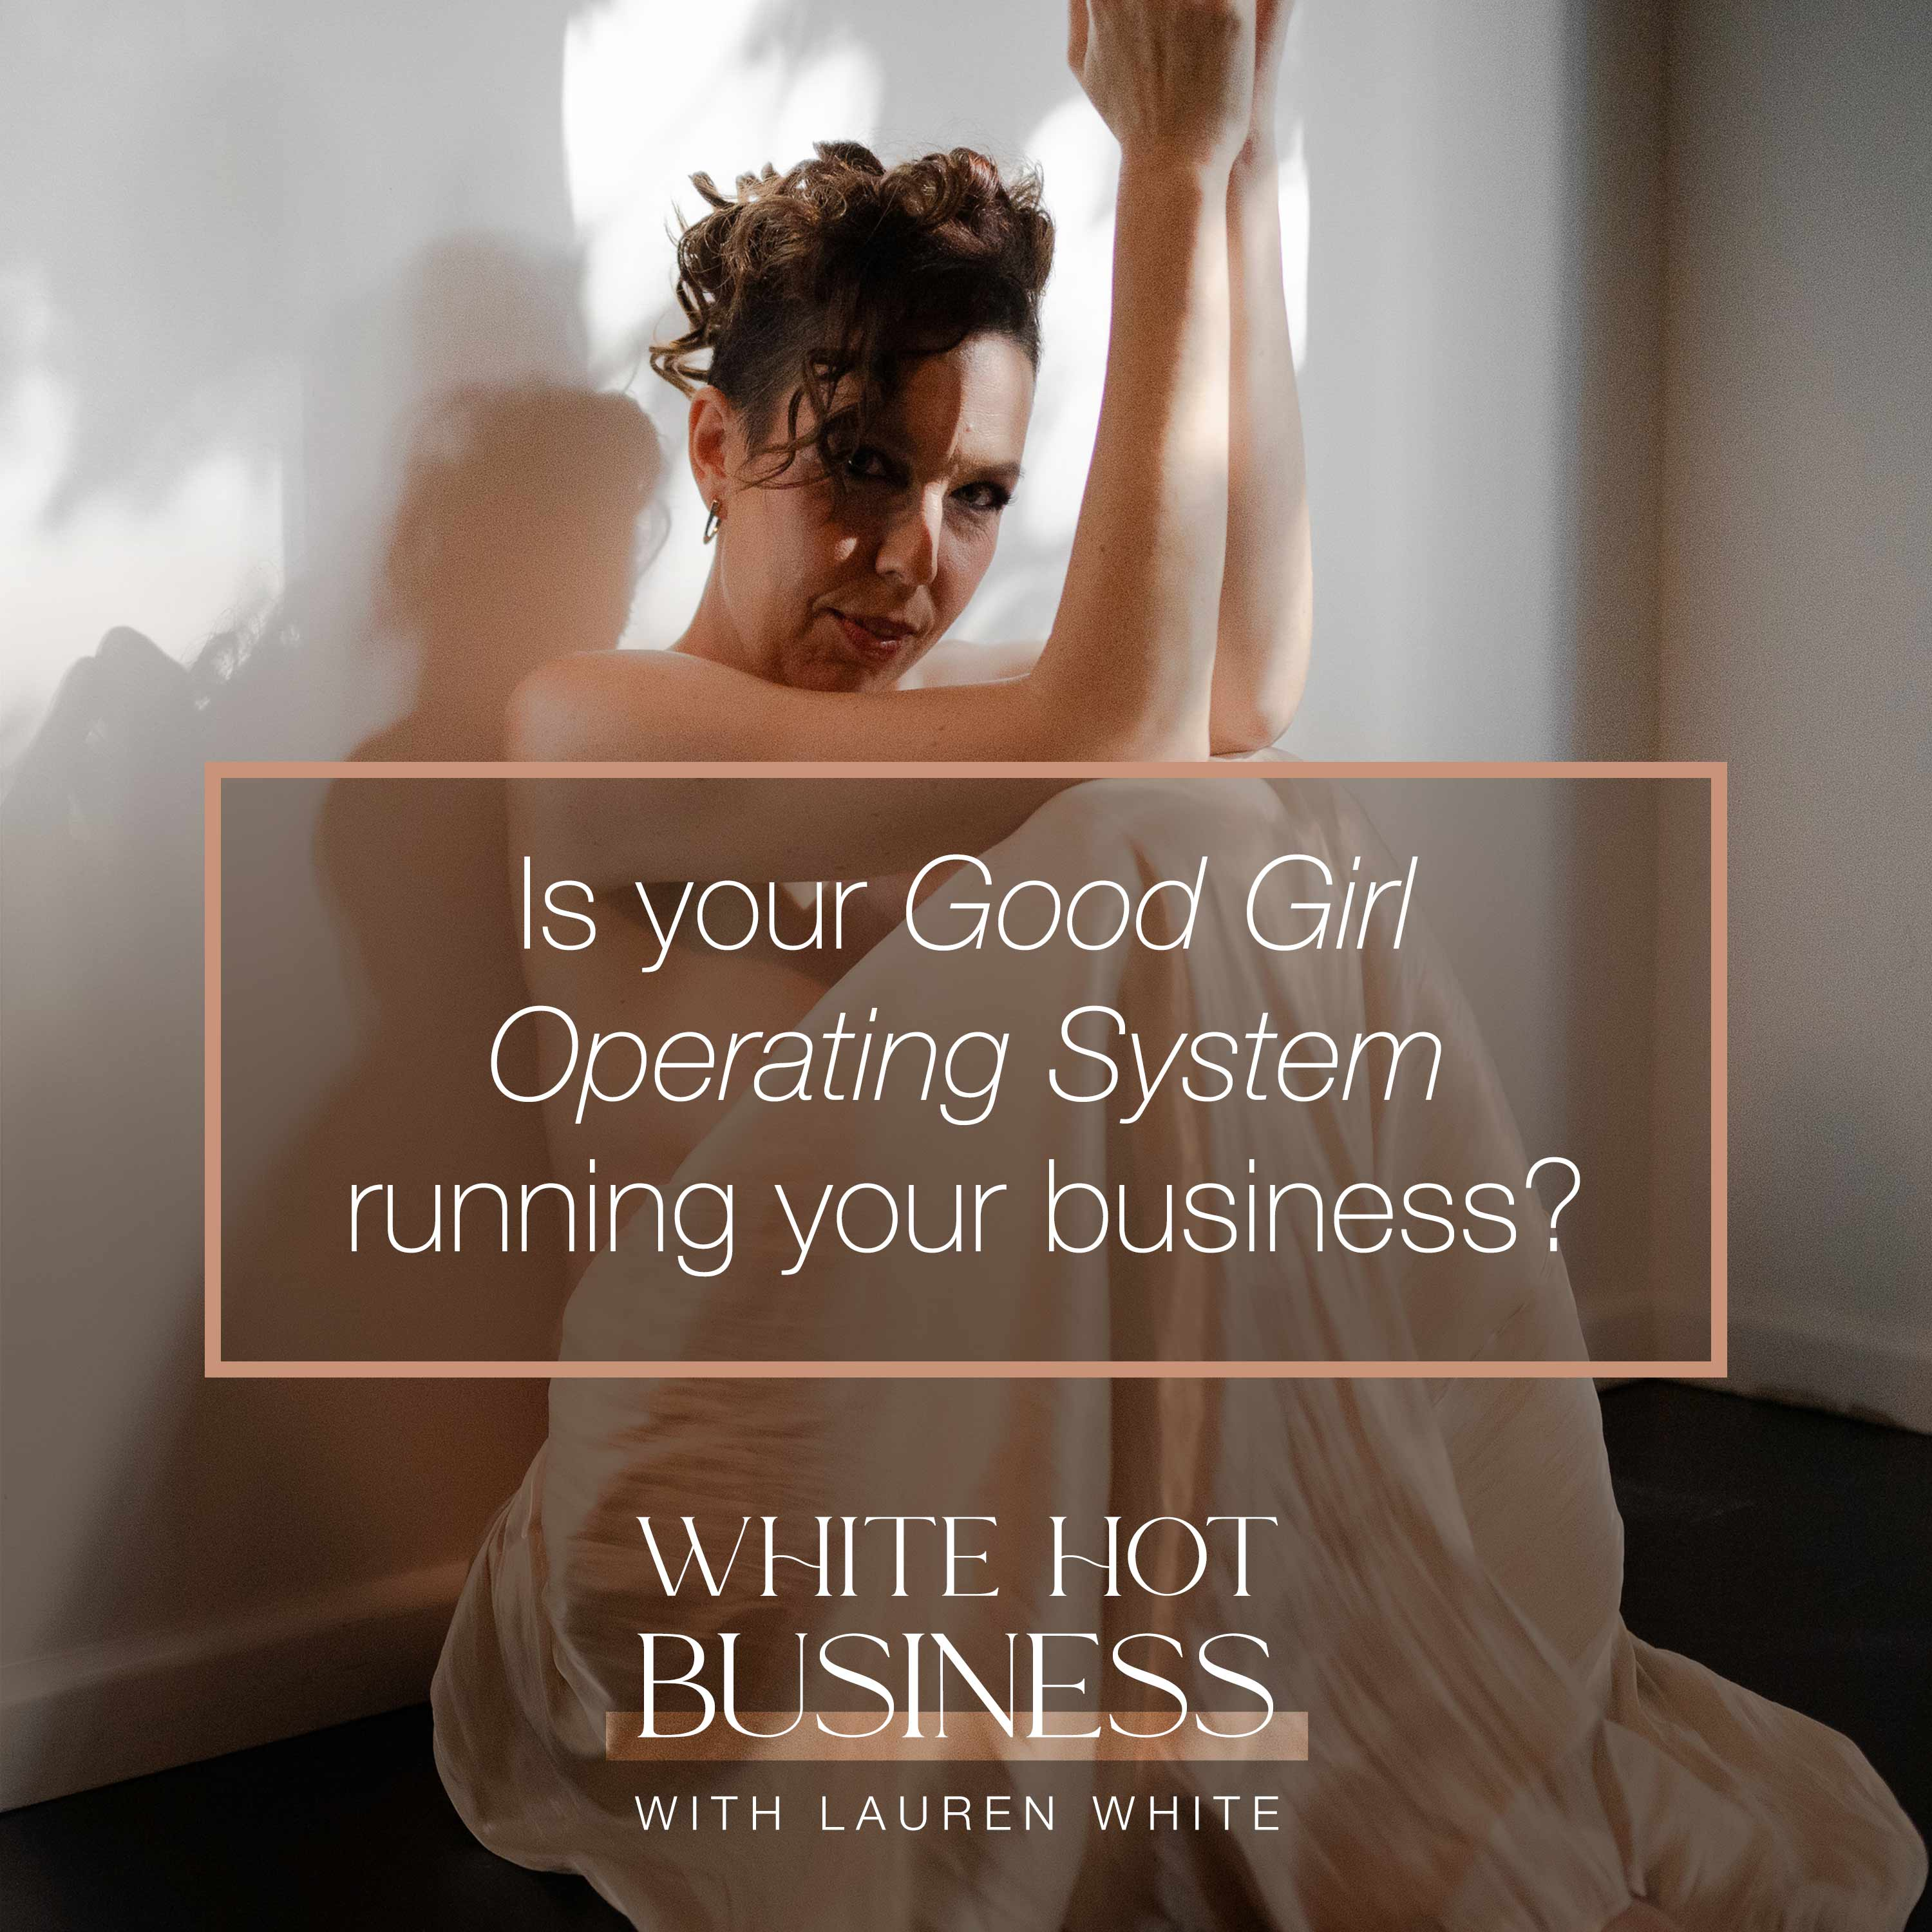 Is your good girl Operating System running your business?